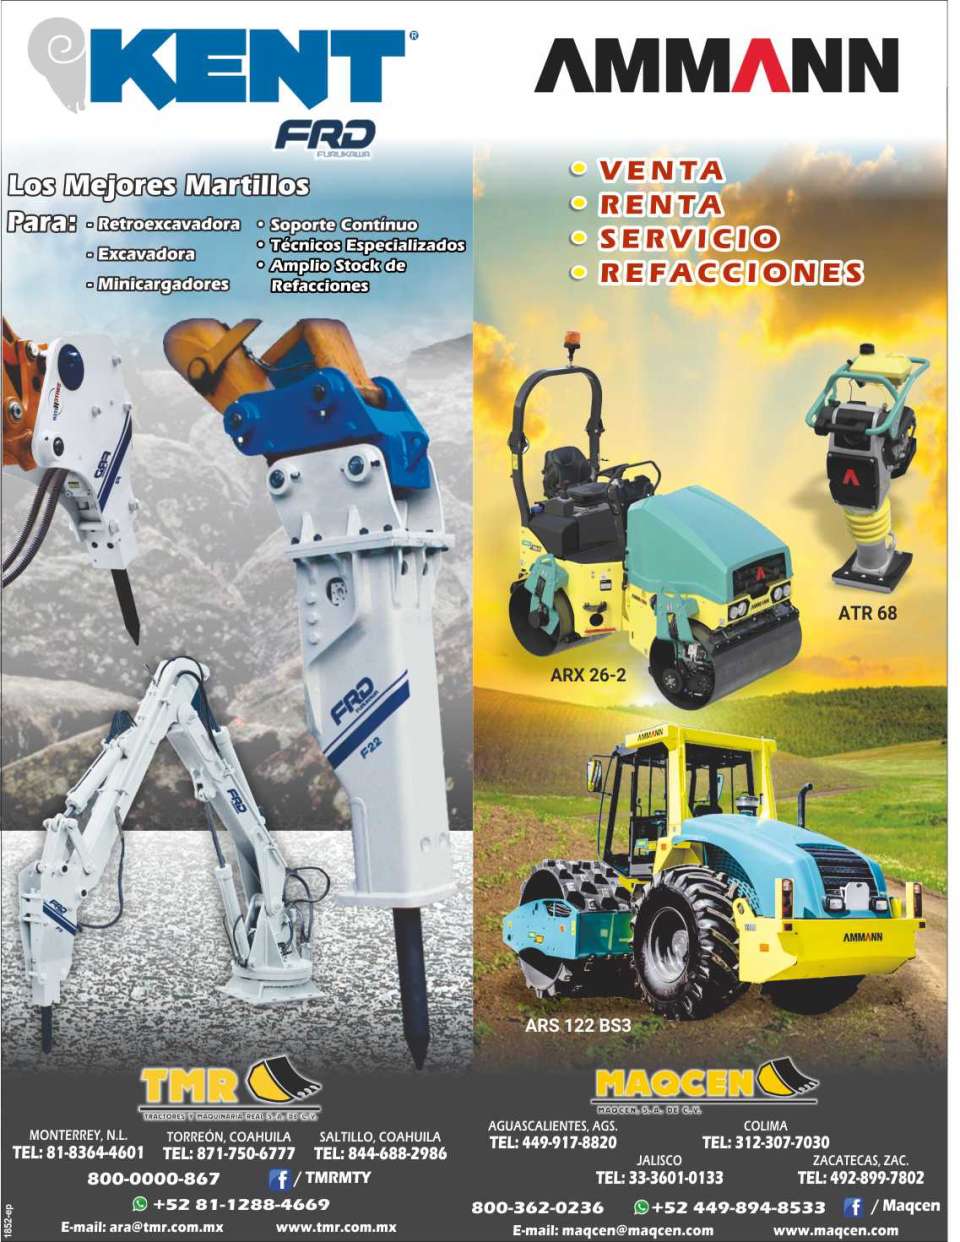 Tractors and Real Machinery. The best hammers for backhoes, excavators, skid steer loaders. Compactors for sale, rent, services, spare parts.